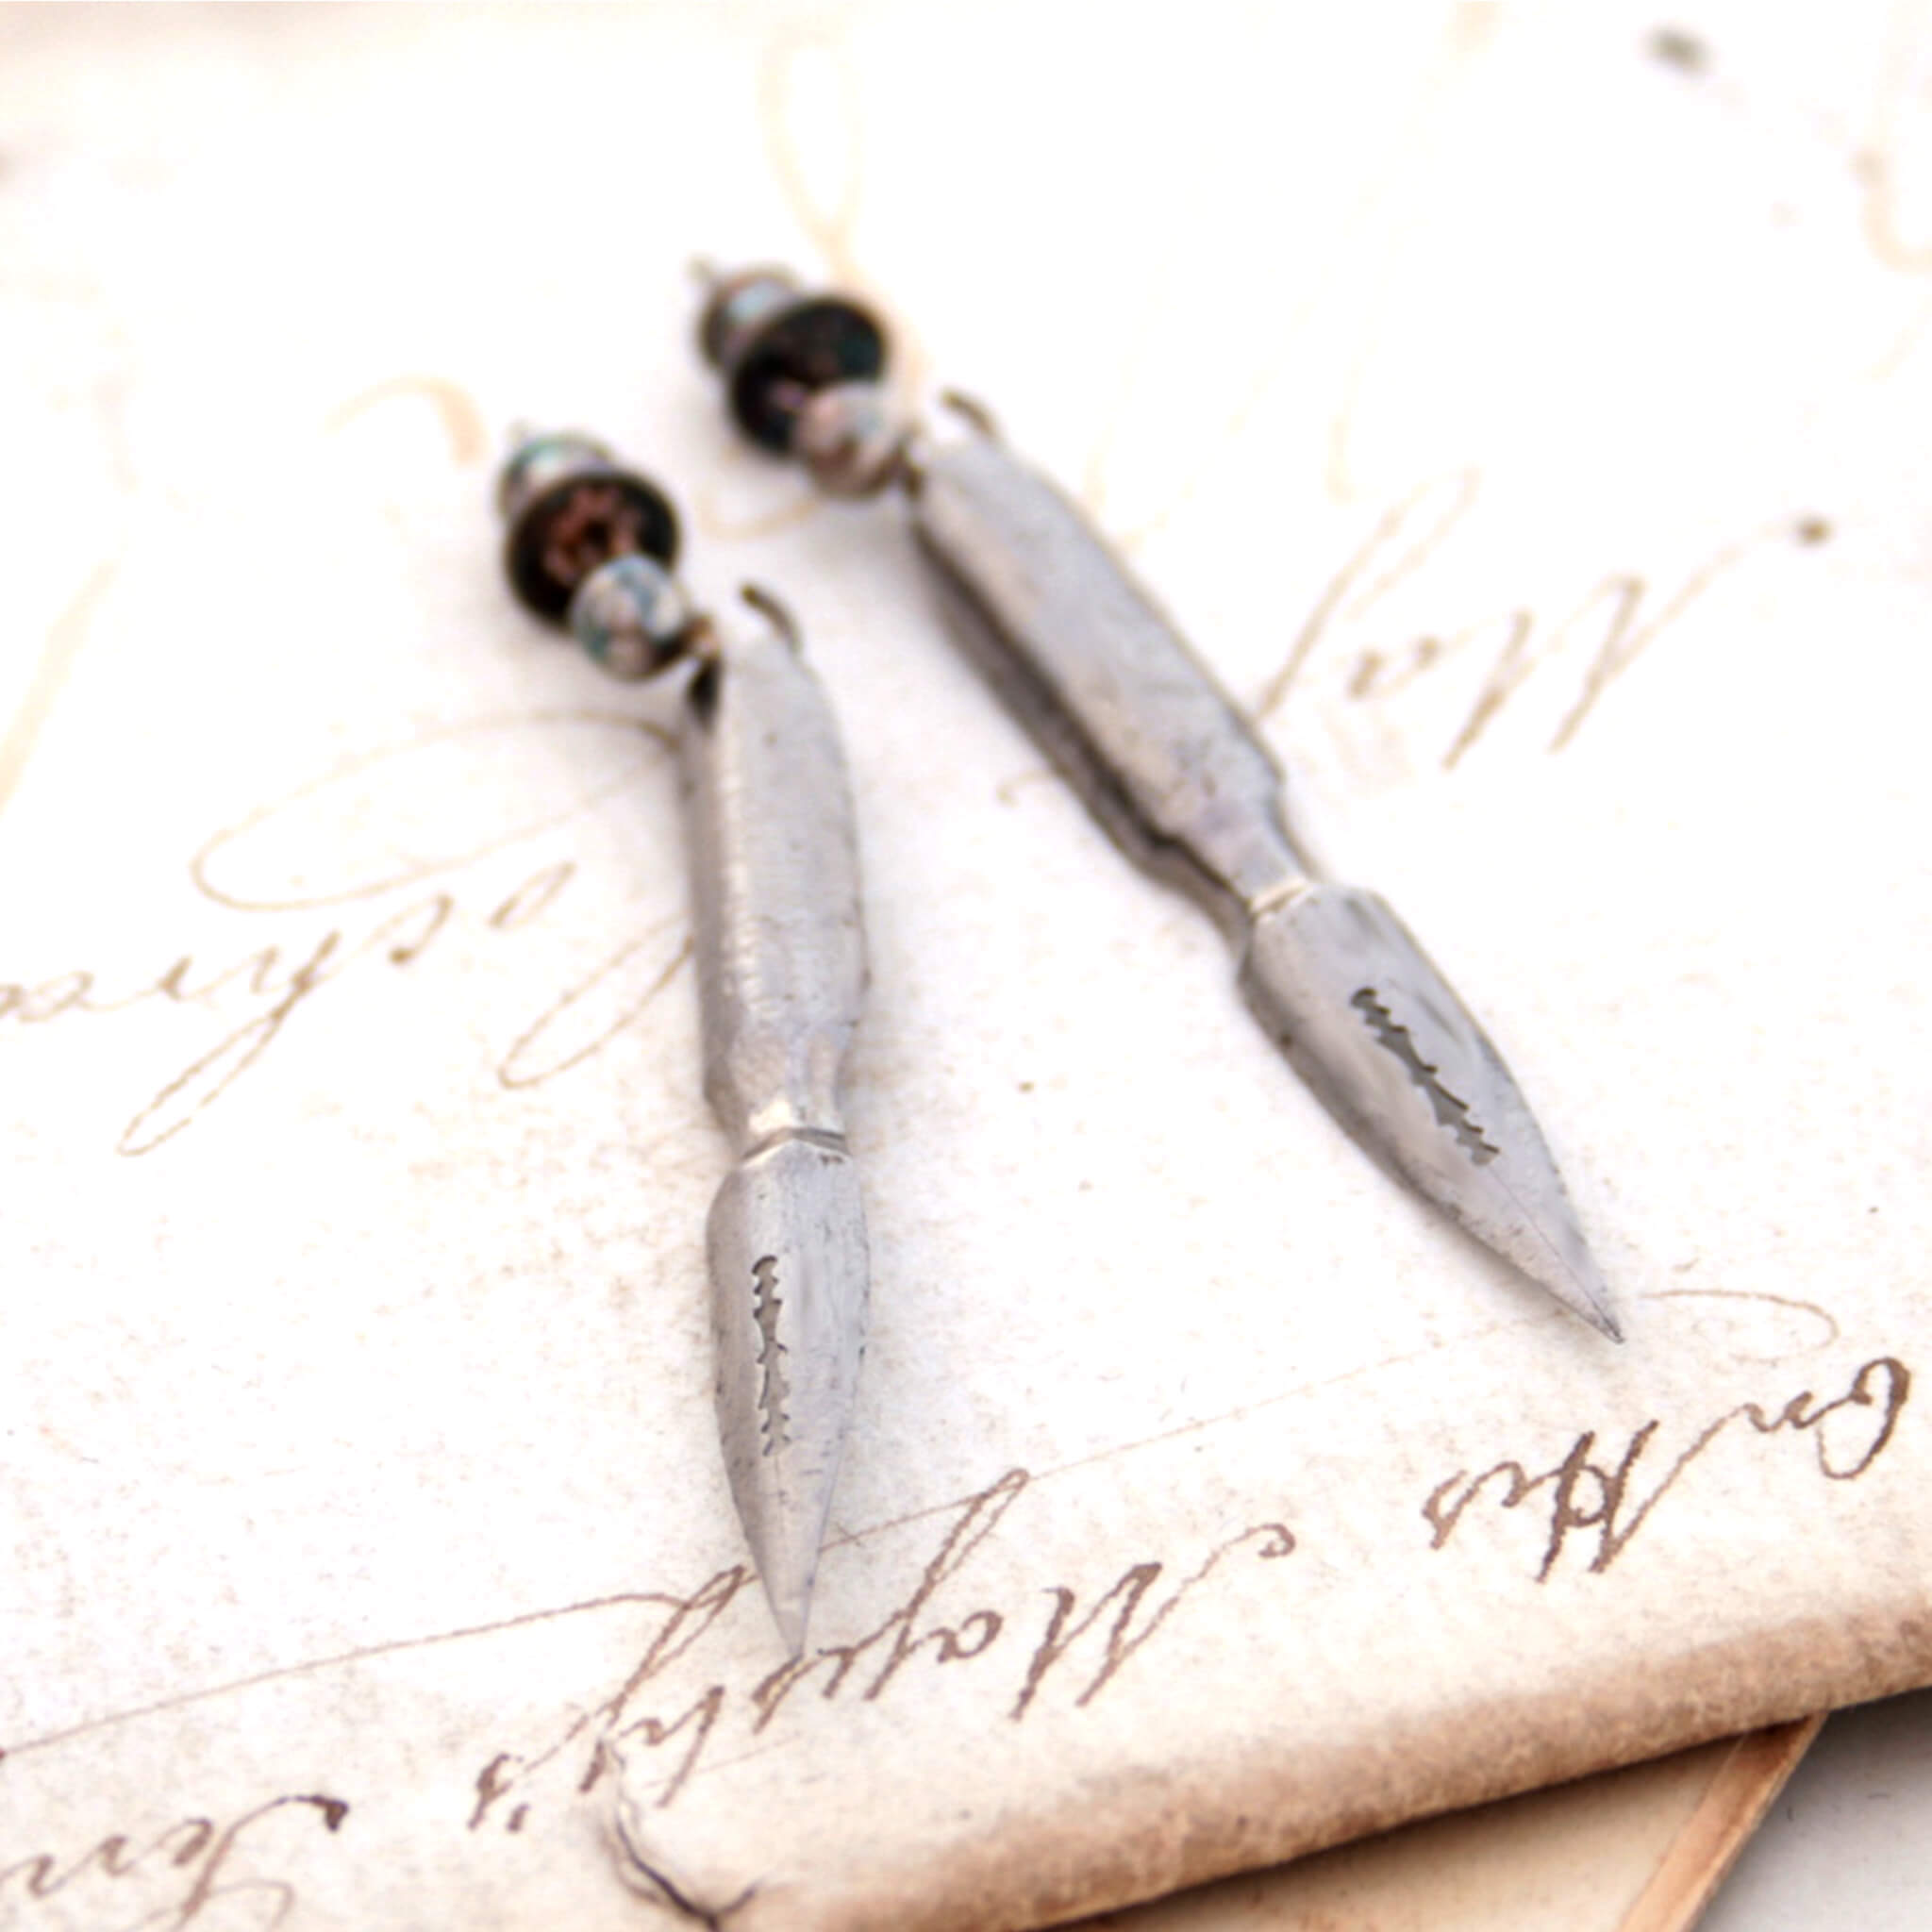 quirky earrings made of antique pen nibs lying on an old letter